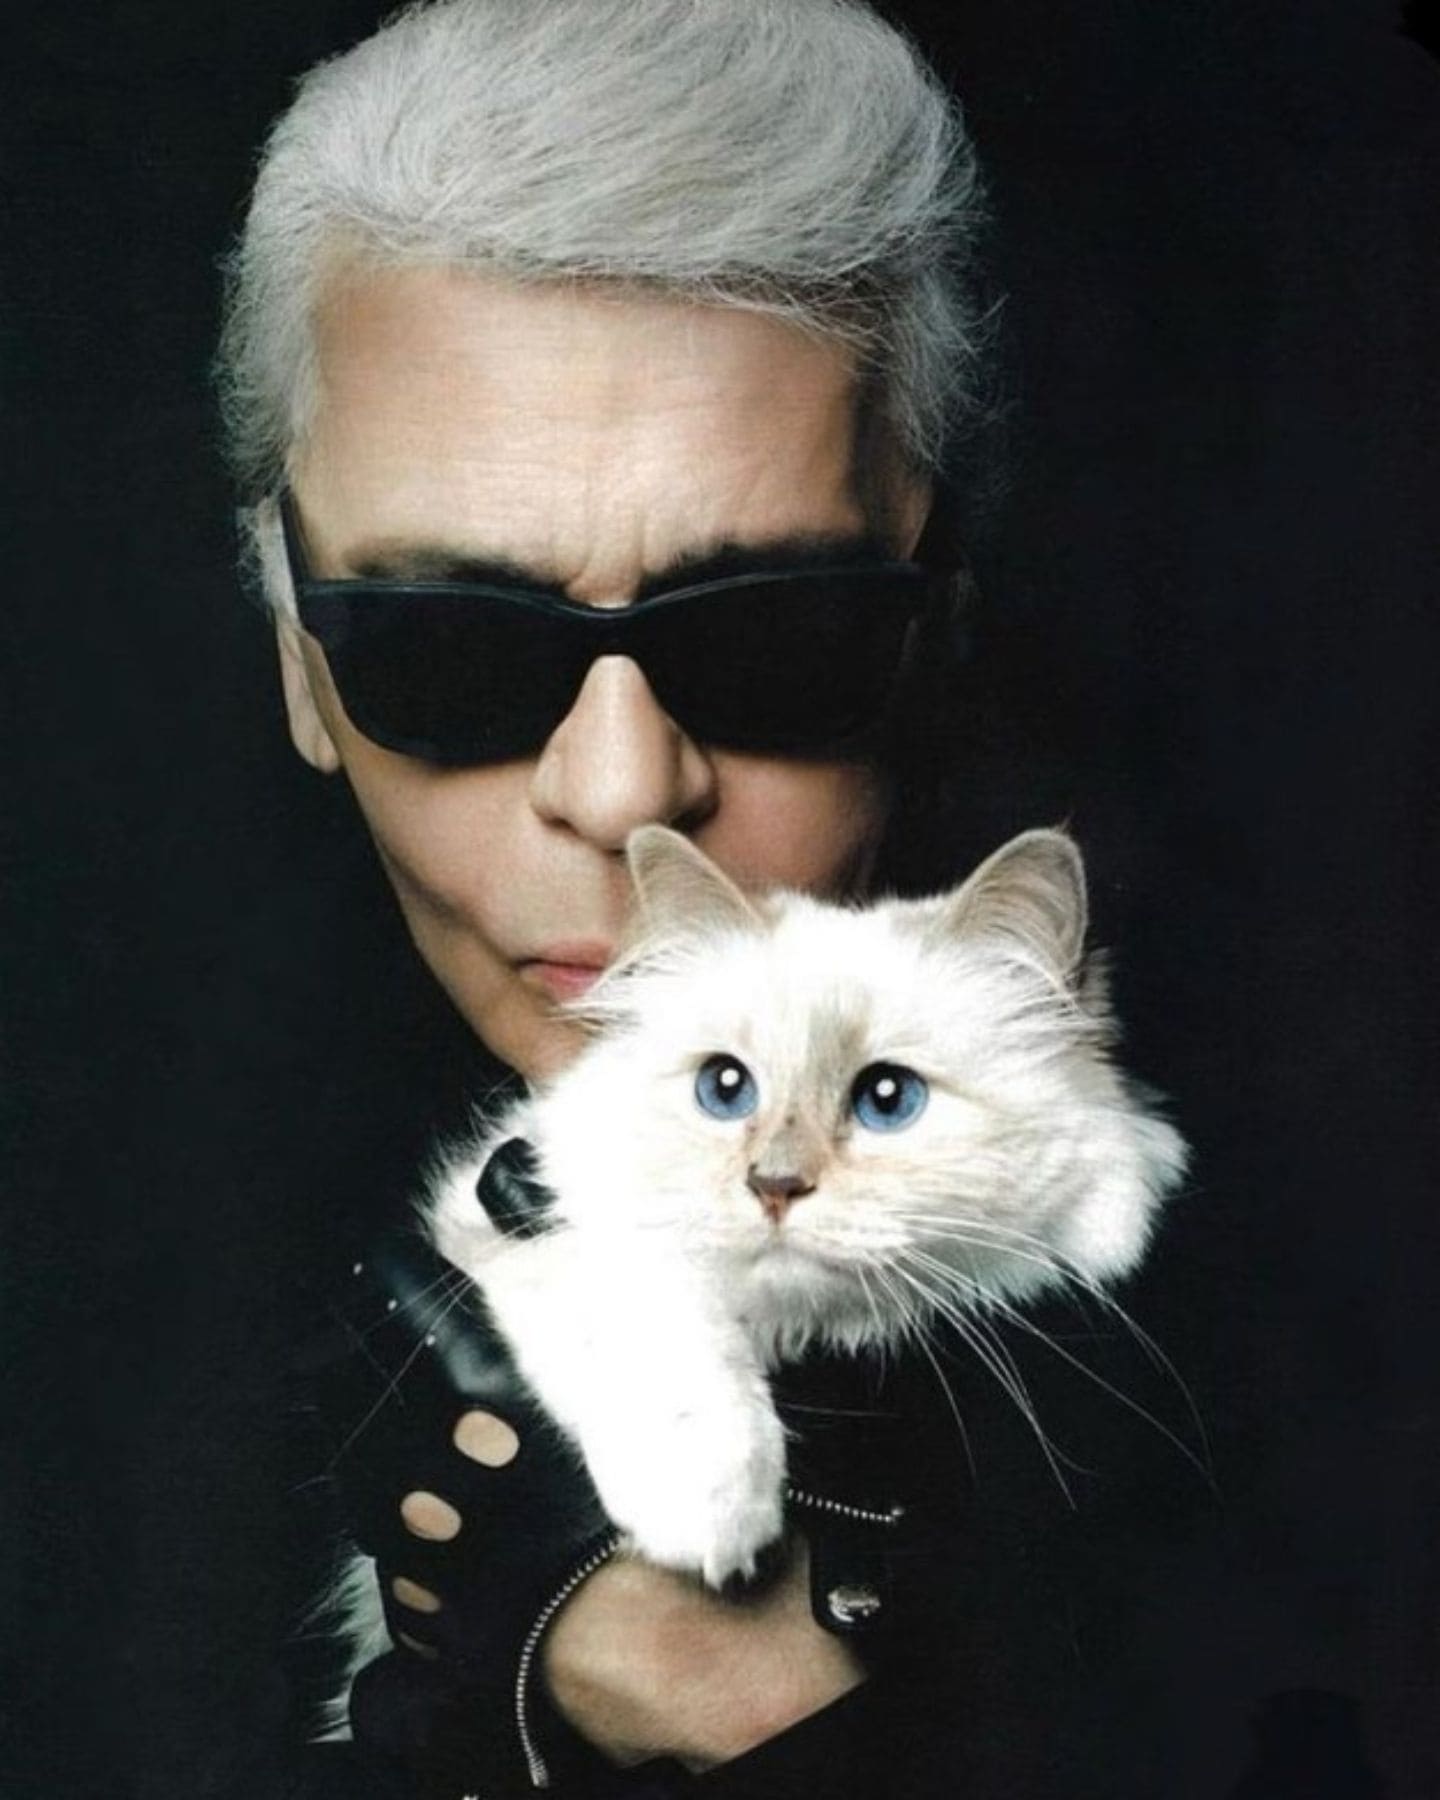 karl lagerfeld and a cat